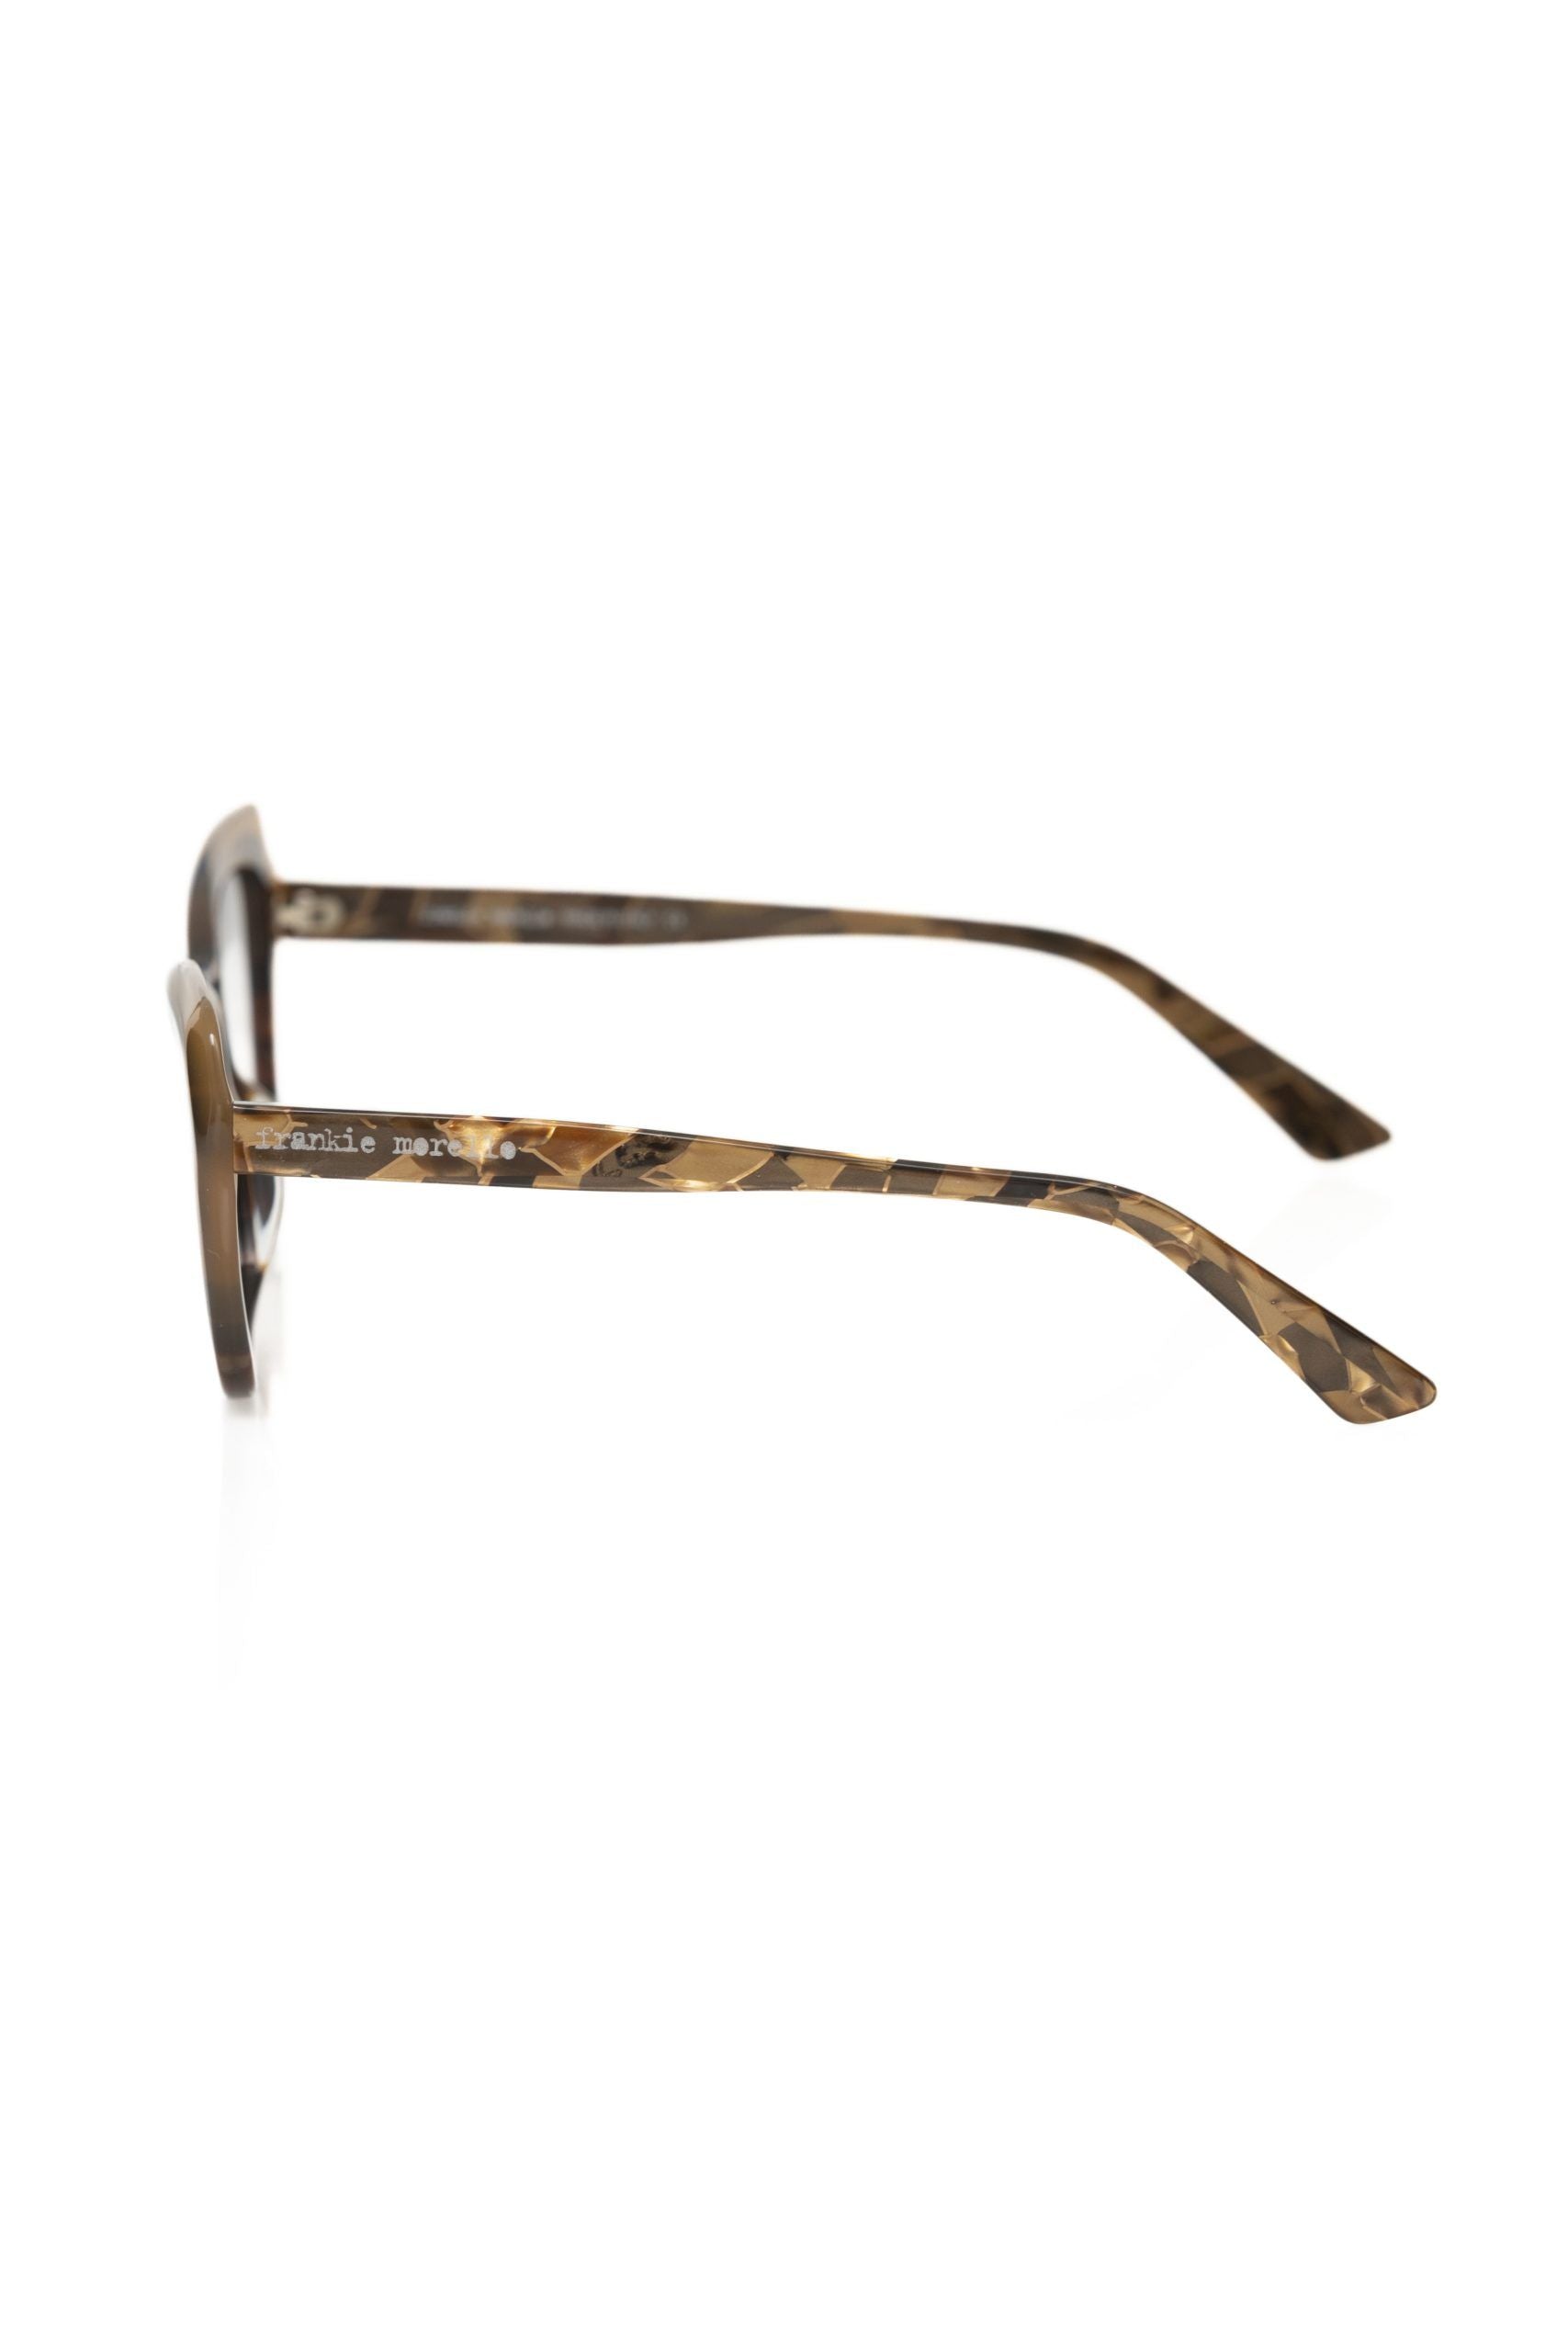 Frankie Morello FRMO-22106 Beige Acetate Frames - Designed by Frankie Morello Available to Buy at a Discounted Price on Moon Behind The Hill Online Designer Discount Store